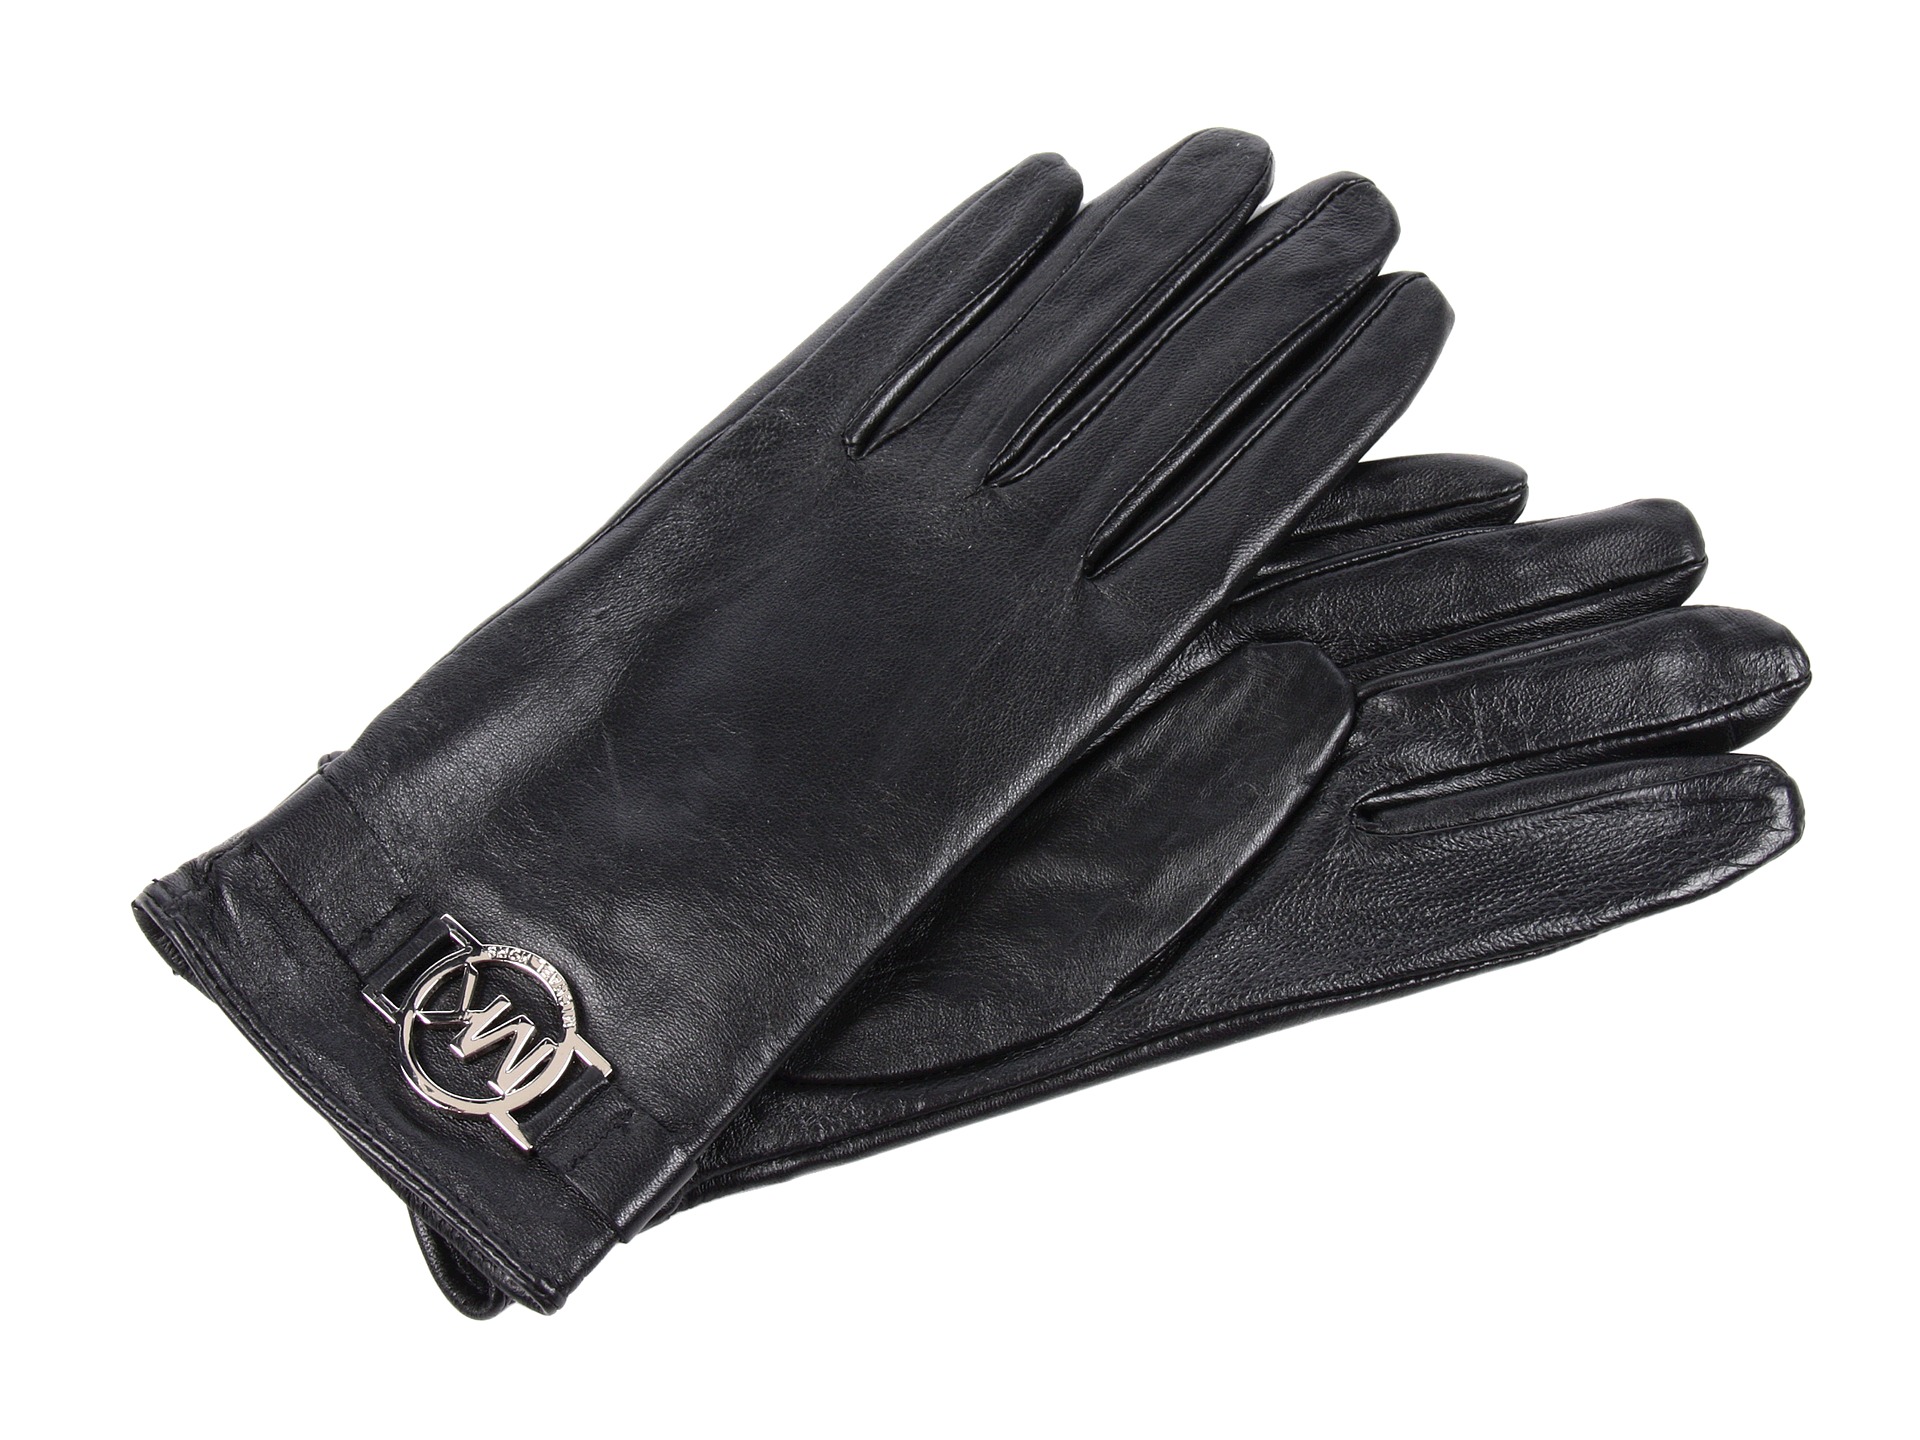 MICHAEL Michael Kors Michael Kors Leather Glove with Chain Bow $69.99 